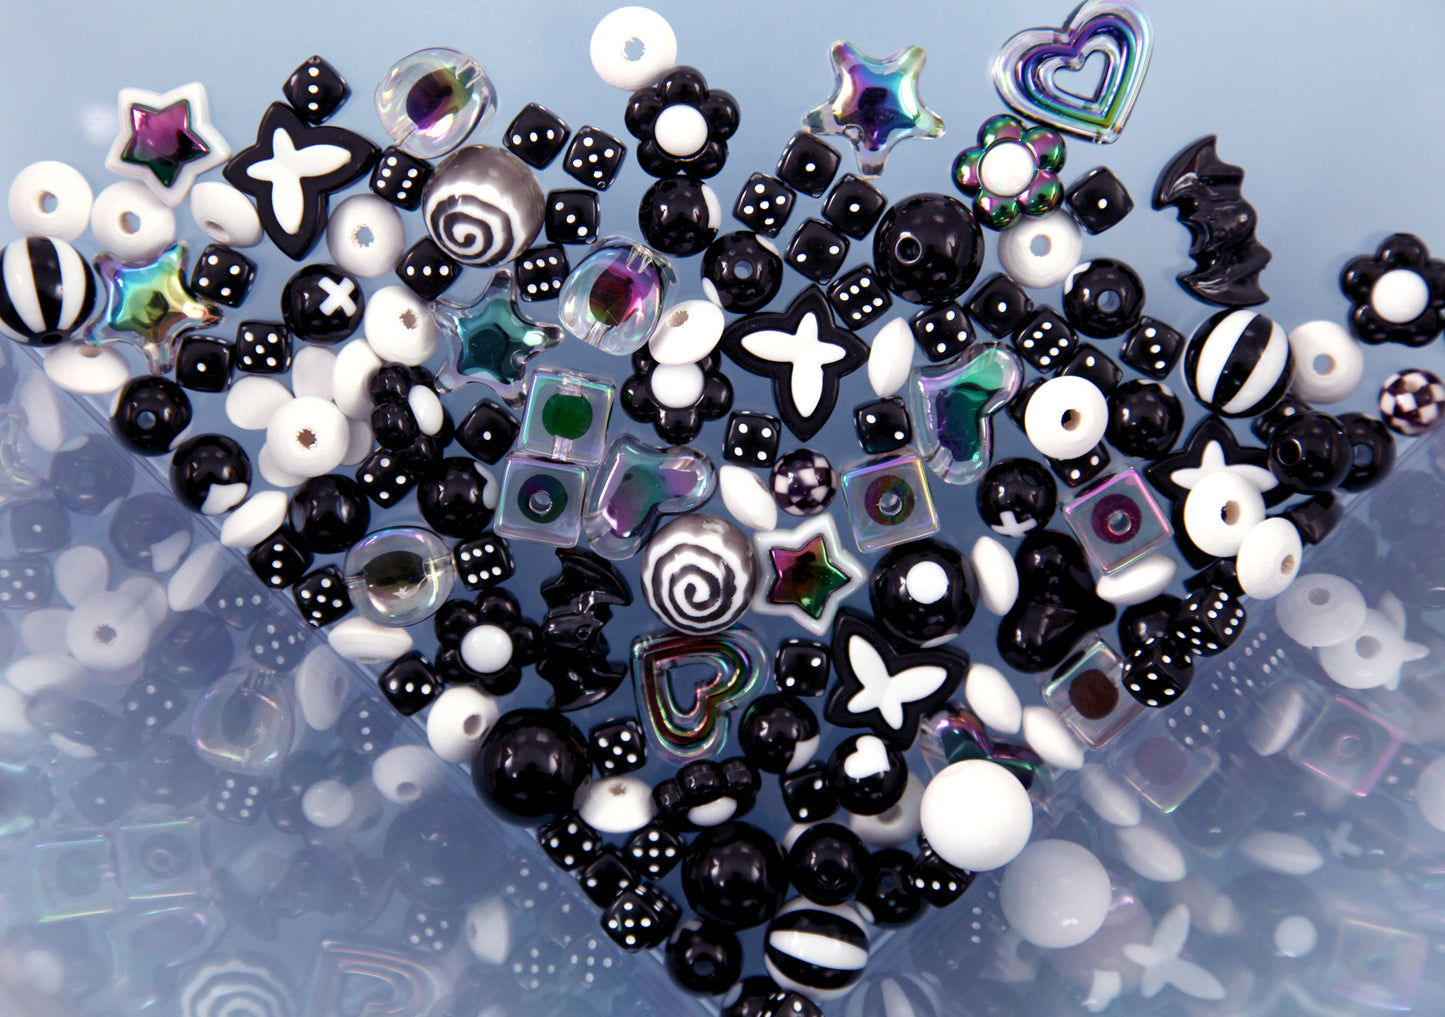 Acrylic Bead Grab Bag - Black and White - Mixed Lot of Plastic Beads - great for kandi, ispy, sensory crafts, jewelry making - Over 100 pcs